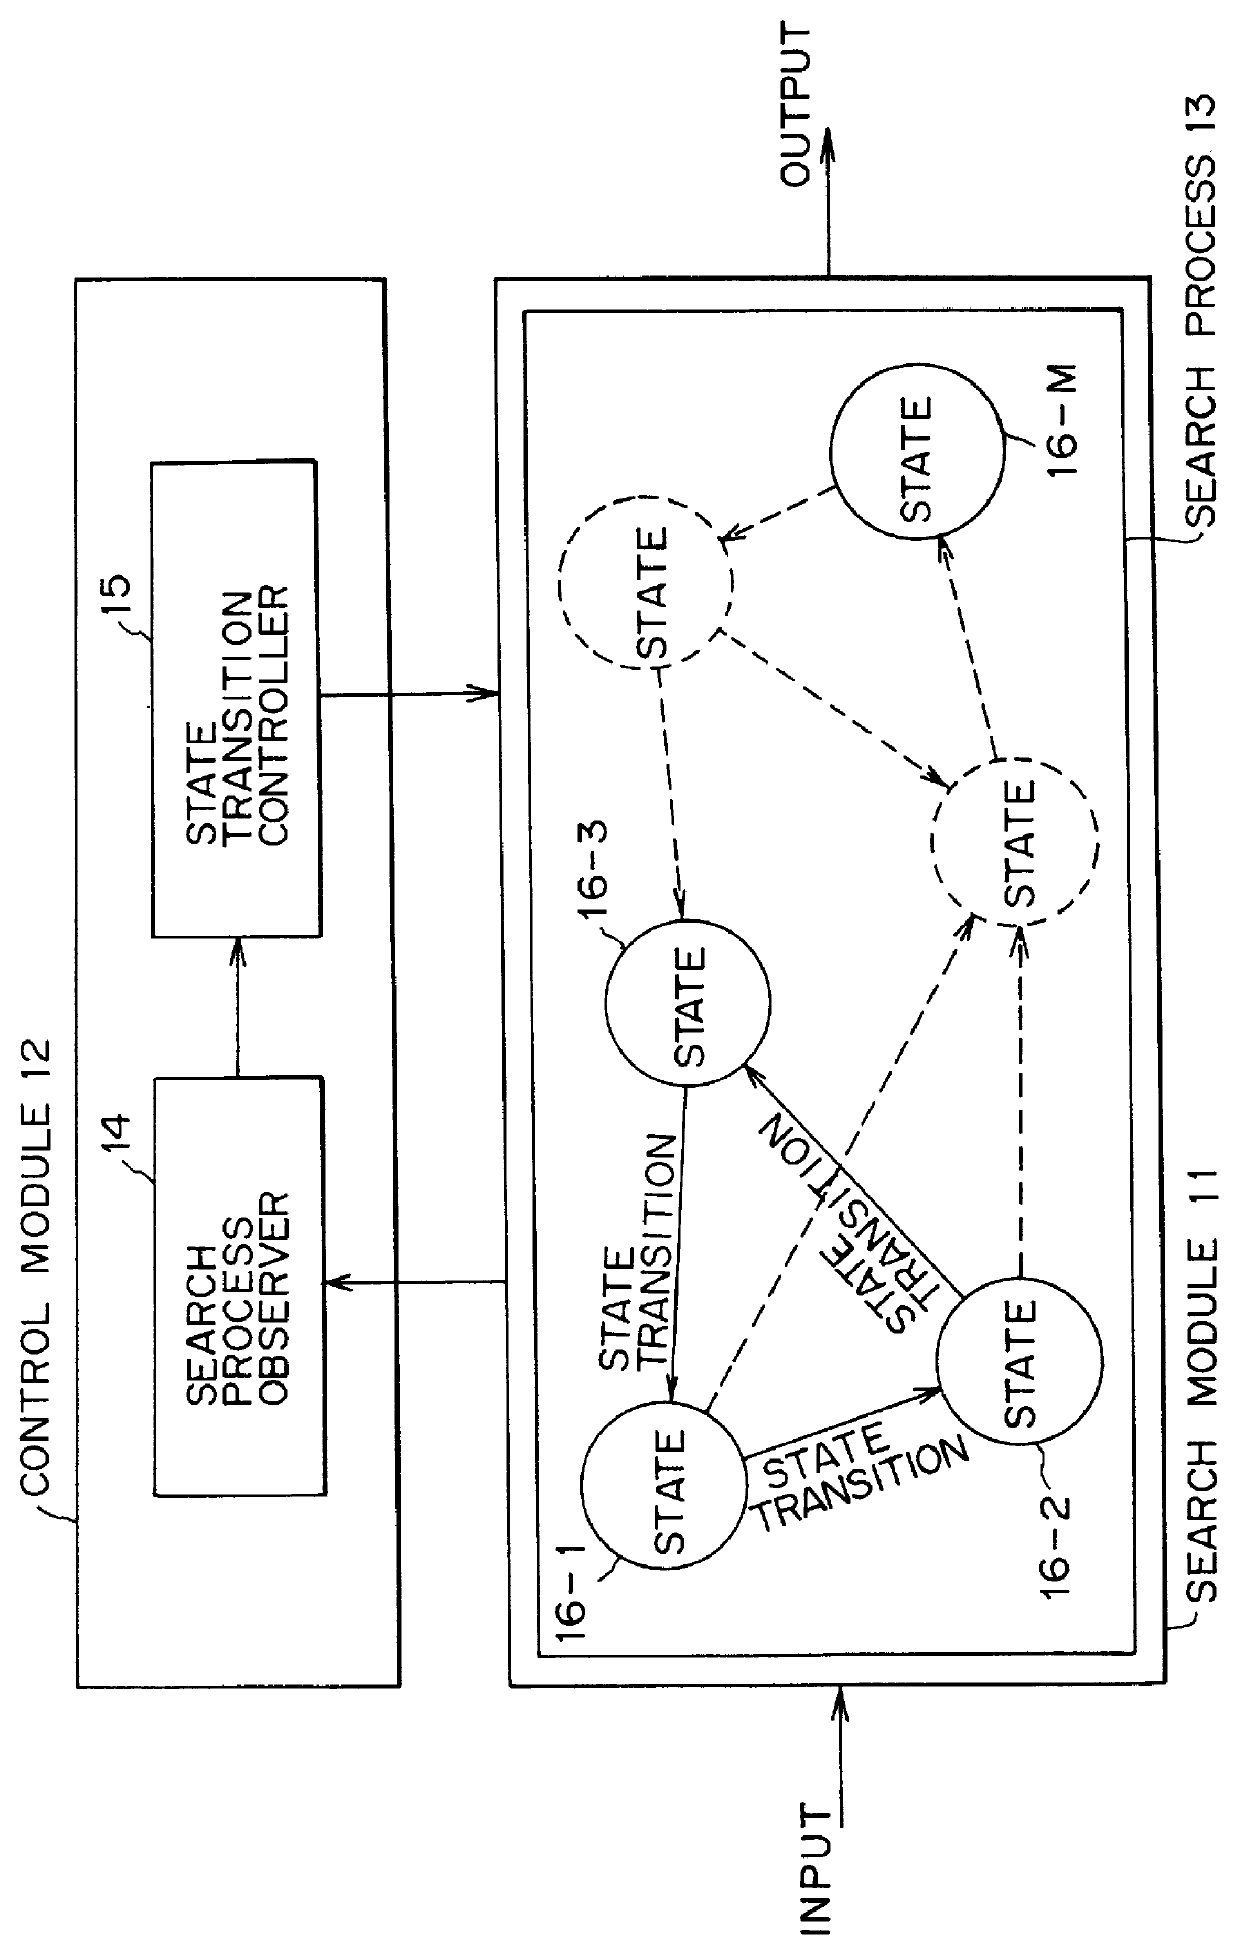 Problem solving operation apparatus using a state transition